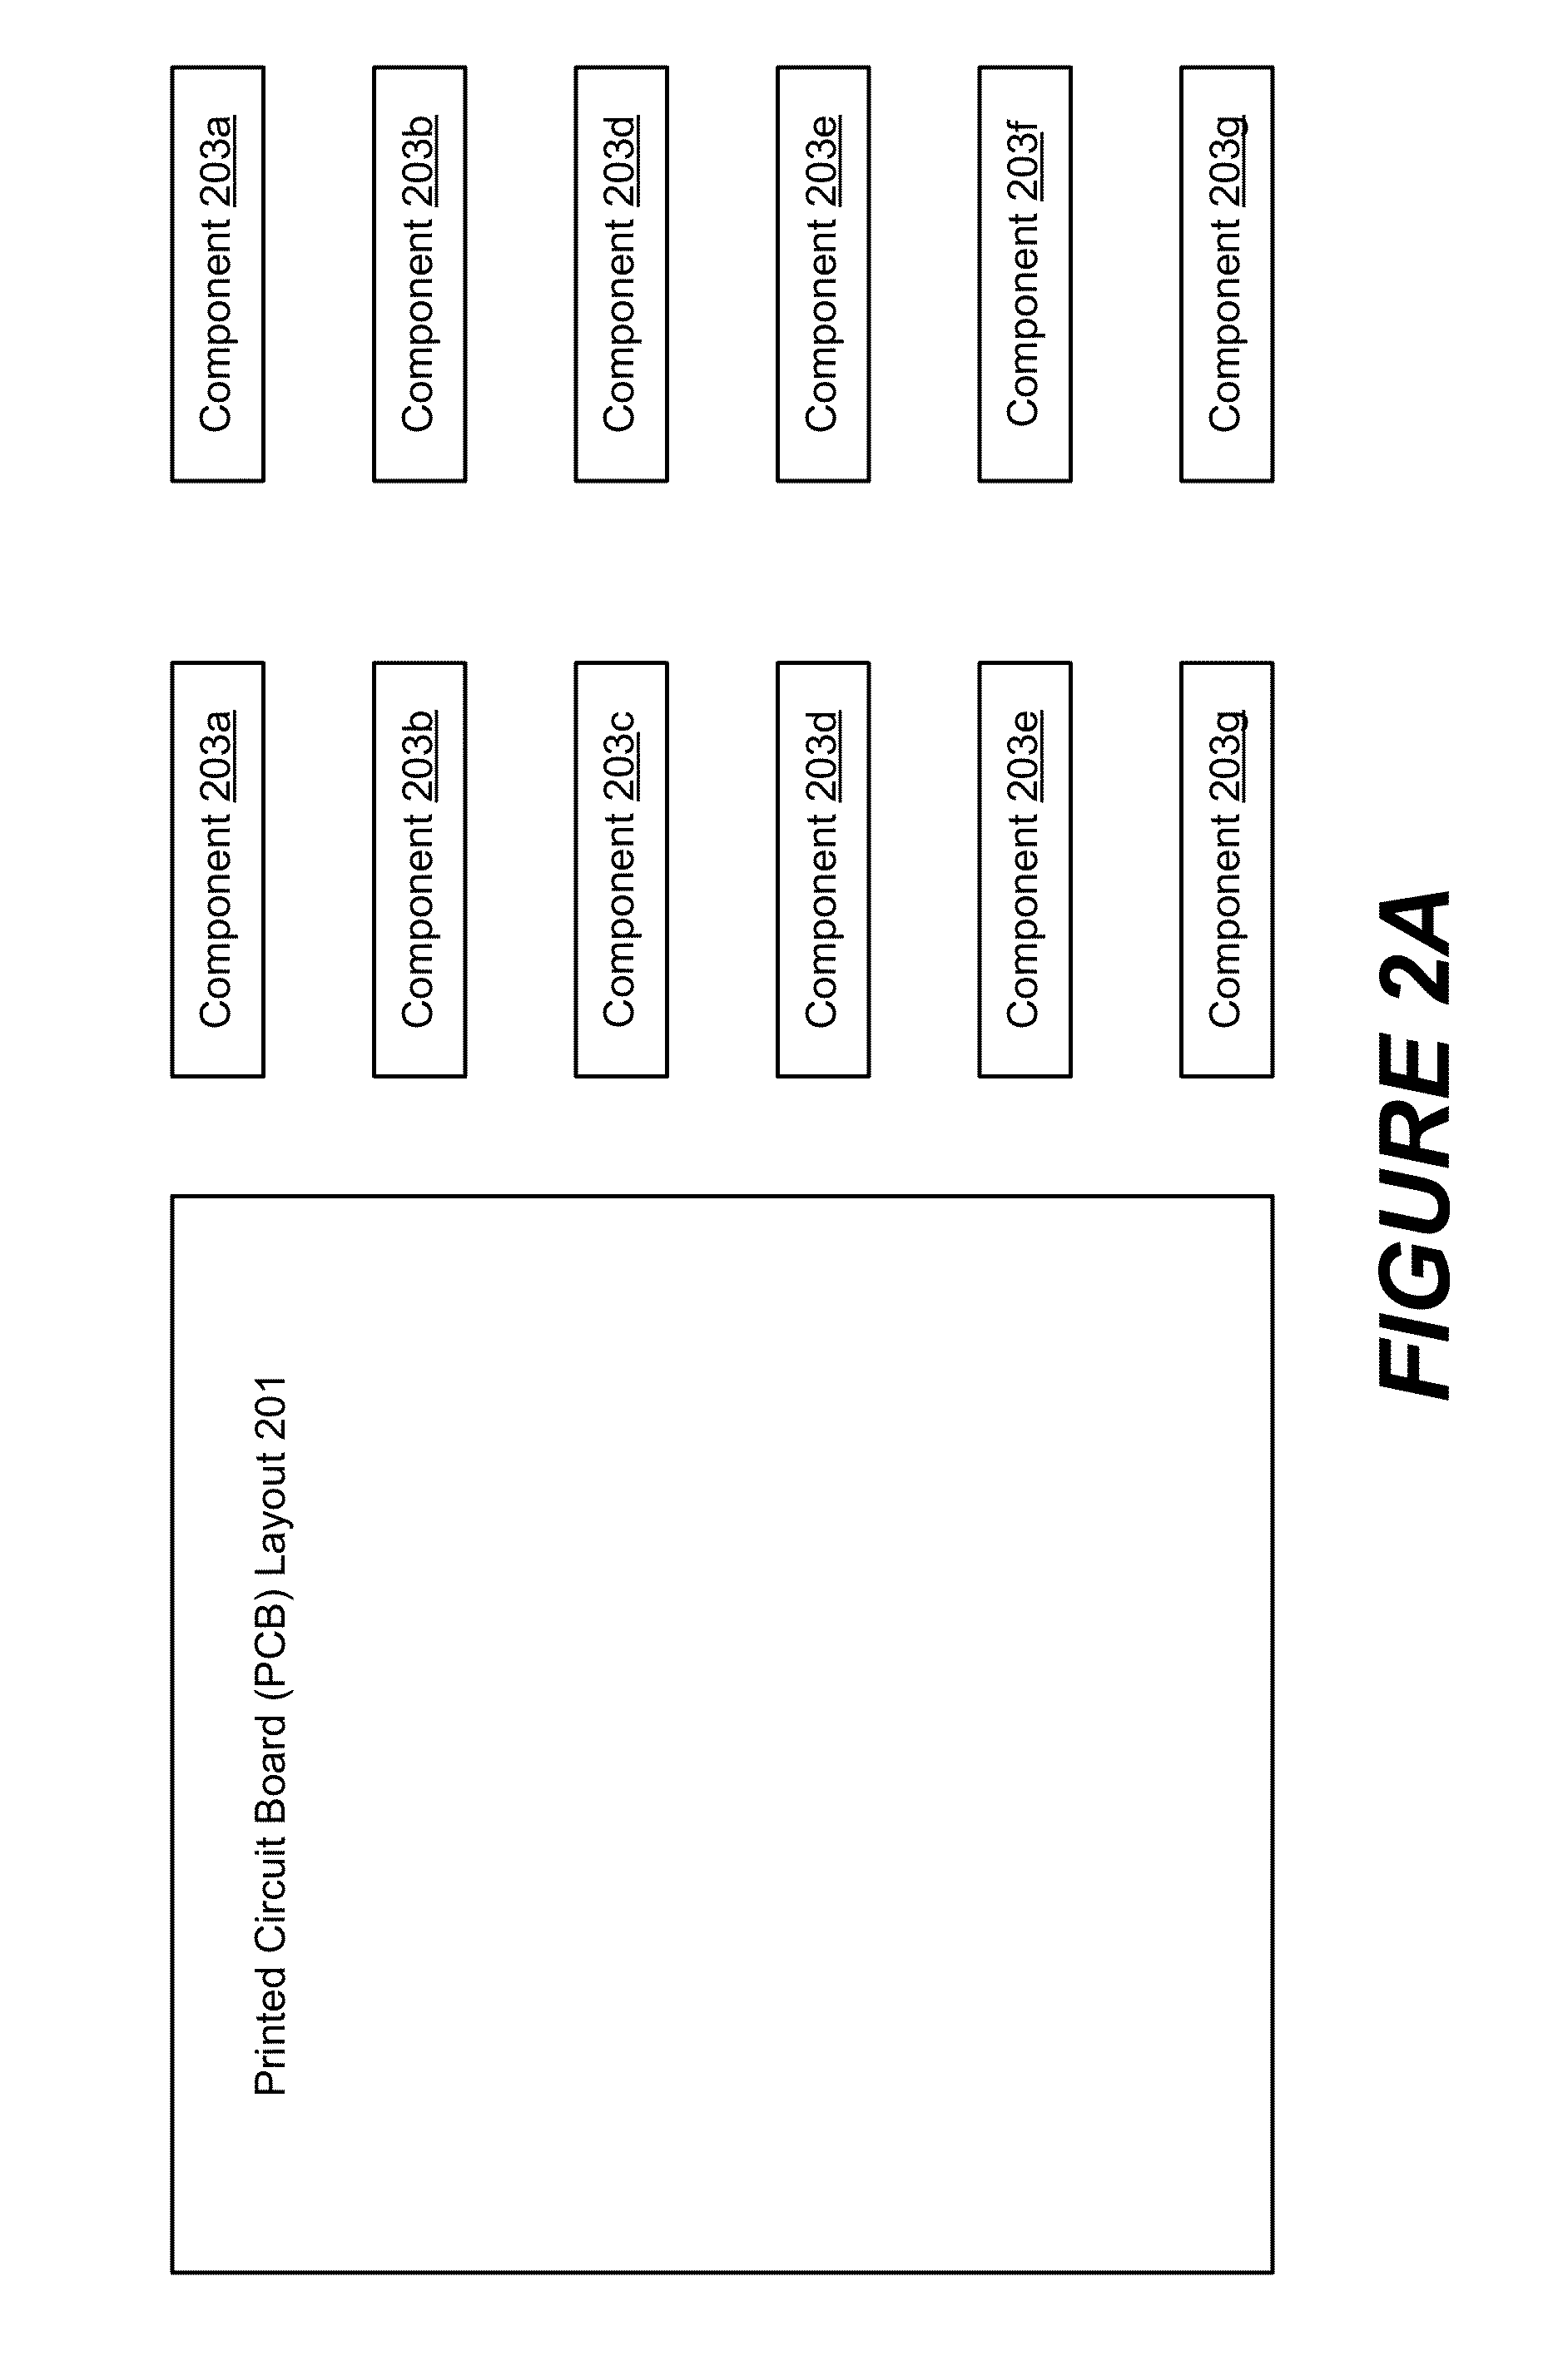 Placement and area adjustment for hierarchical groups in printed circuit board design